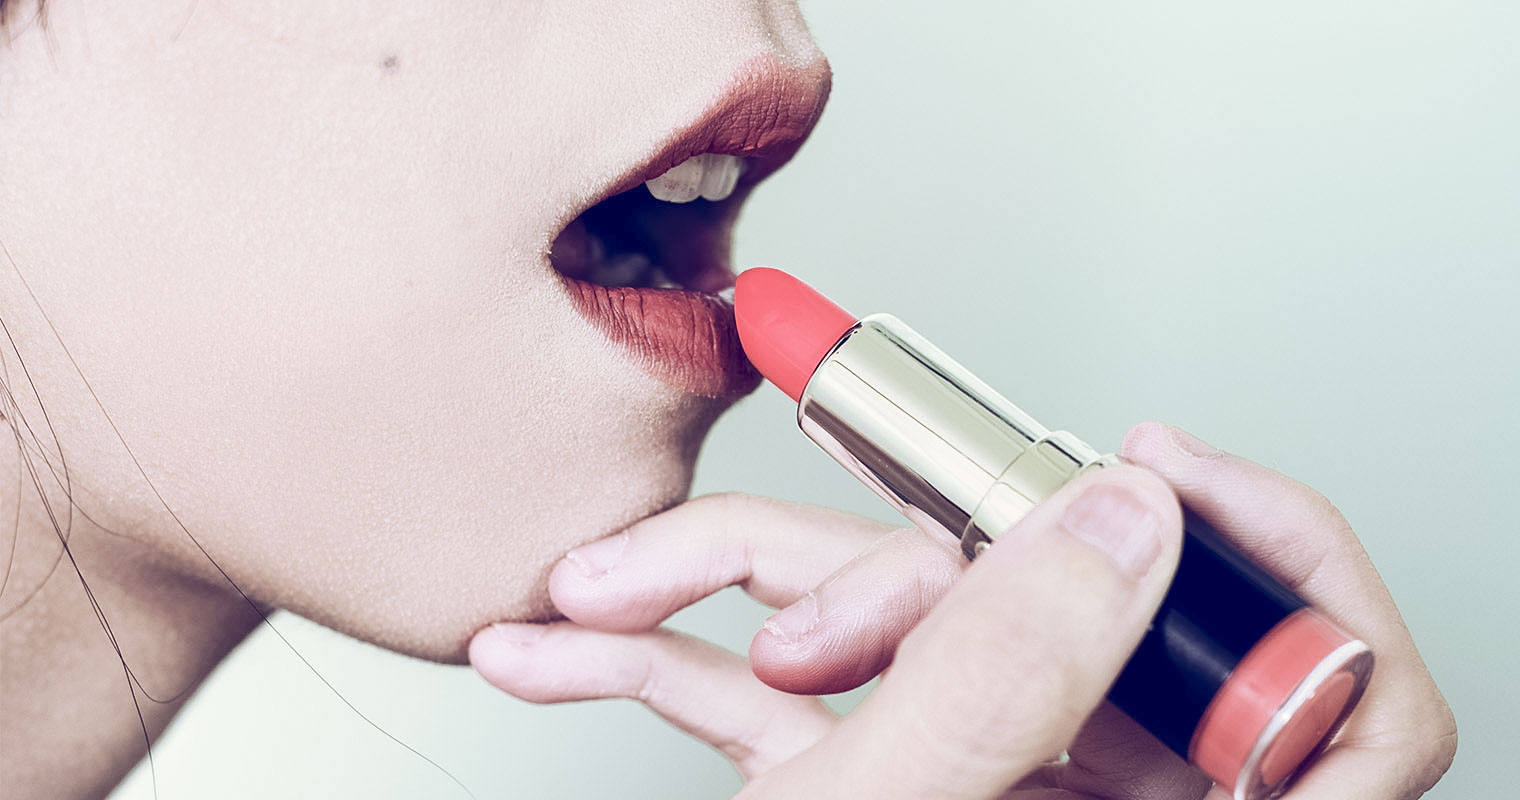 Woman applying lipsticks from the market may contain lead